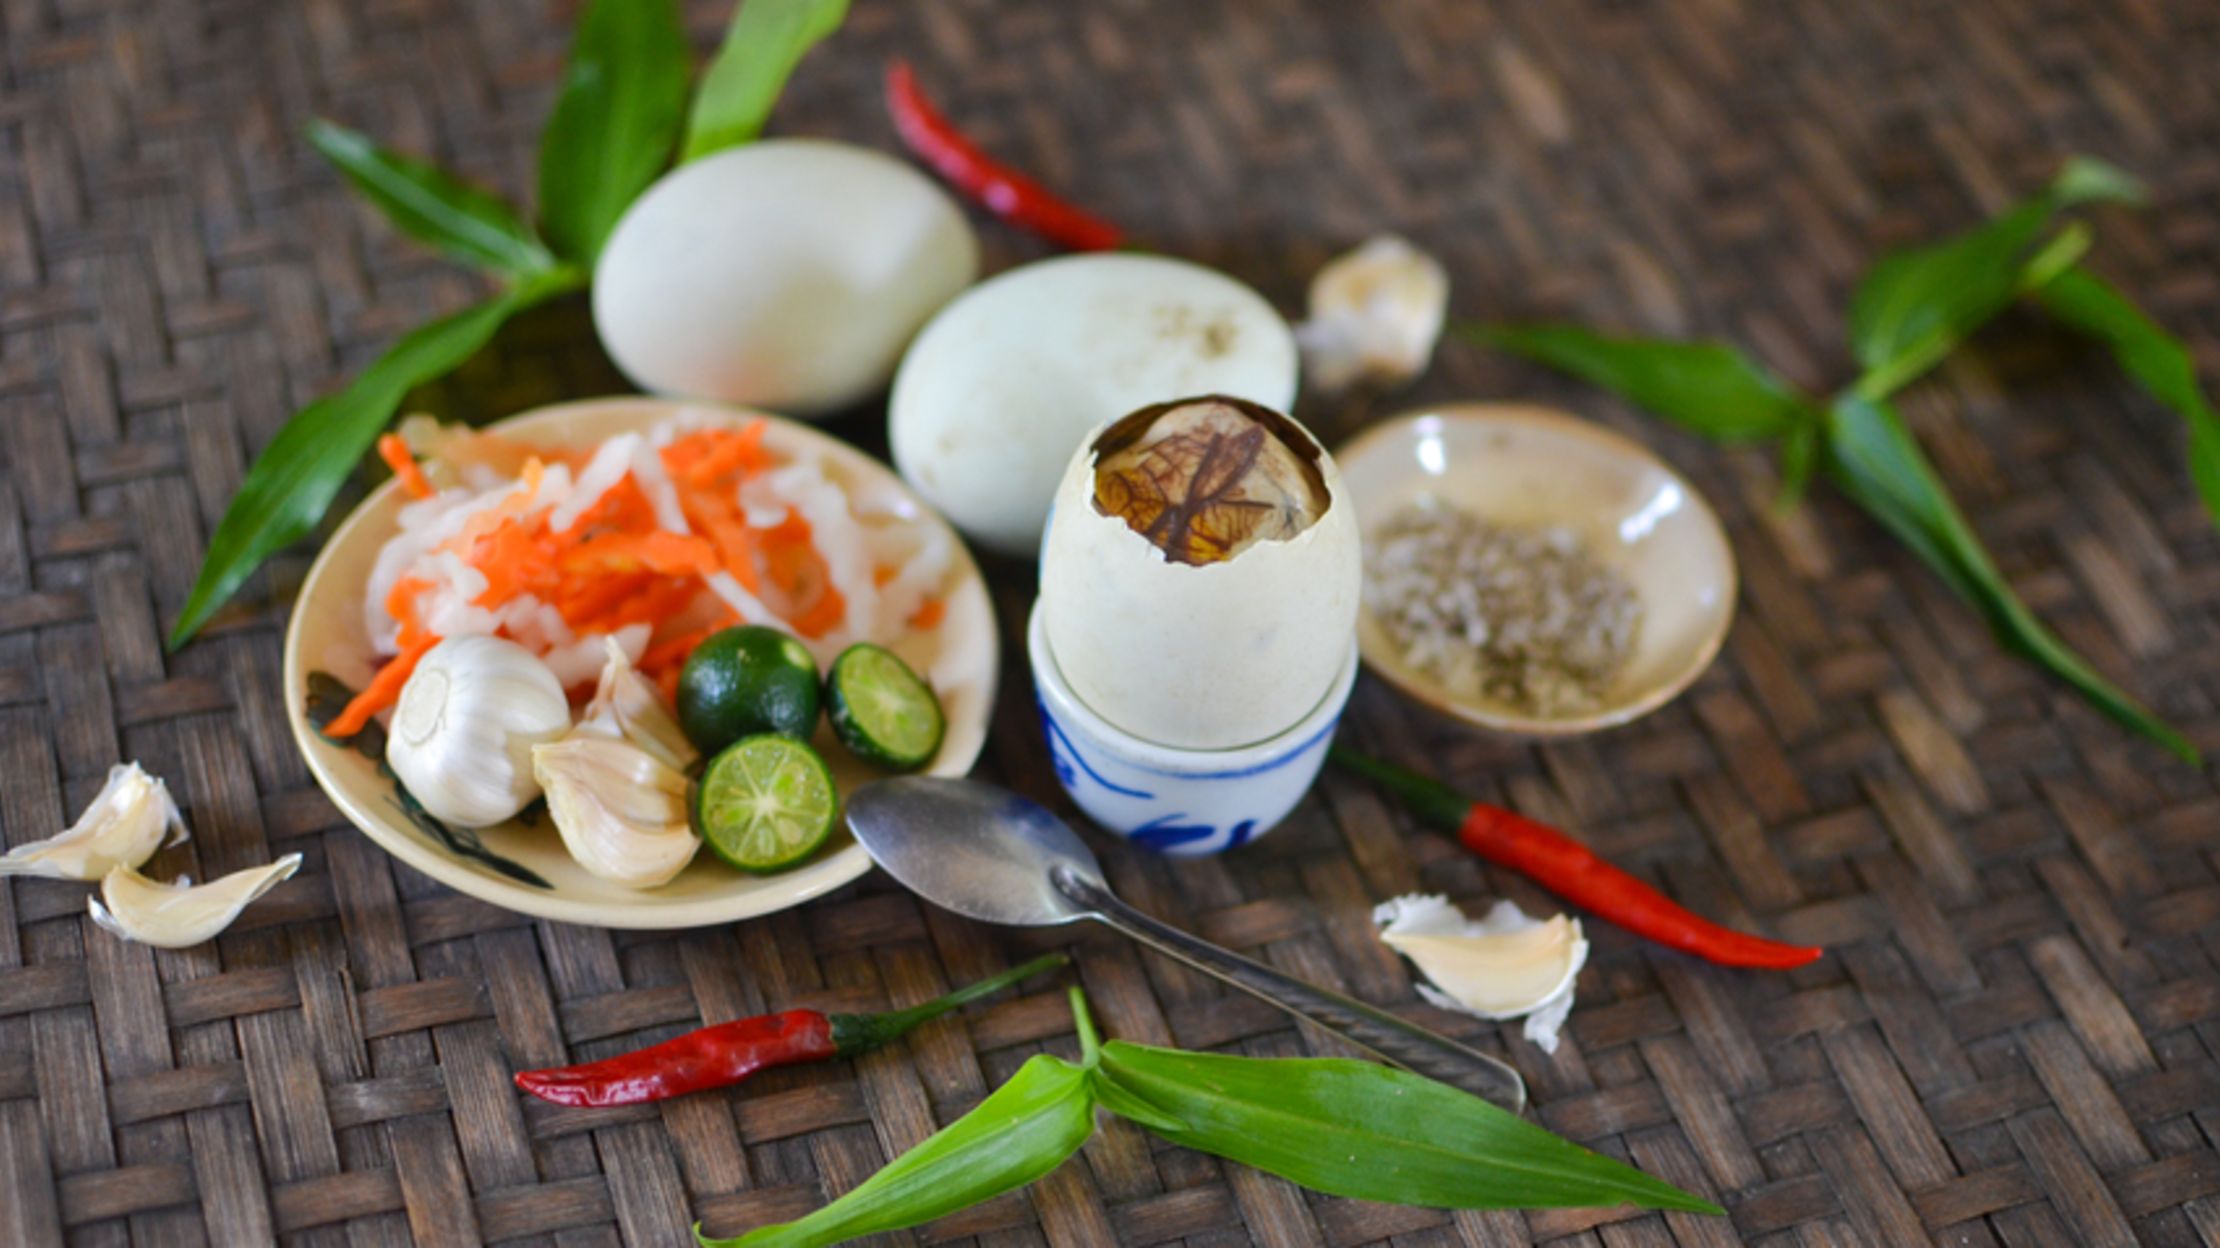 10 Delicacies From Around the World To Try | Mental Floss